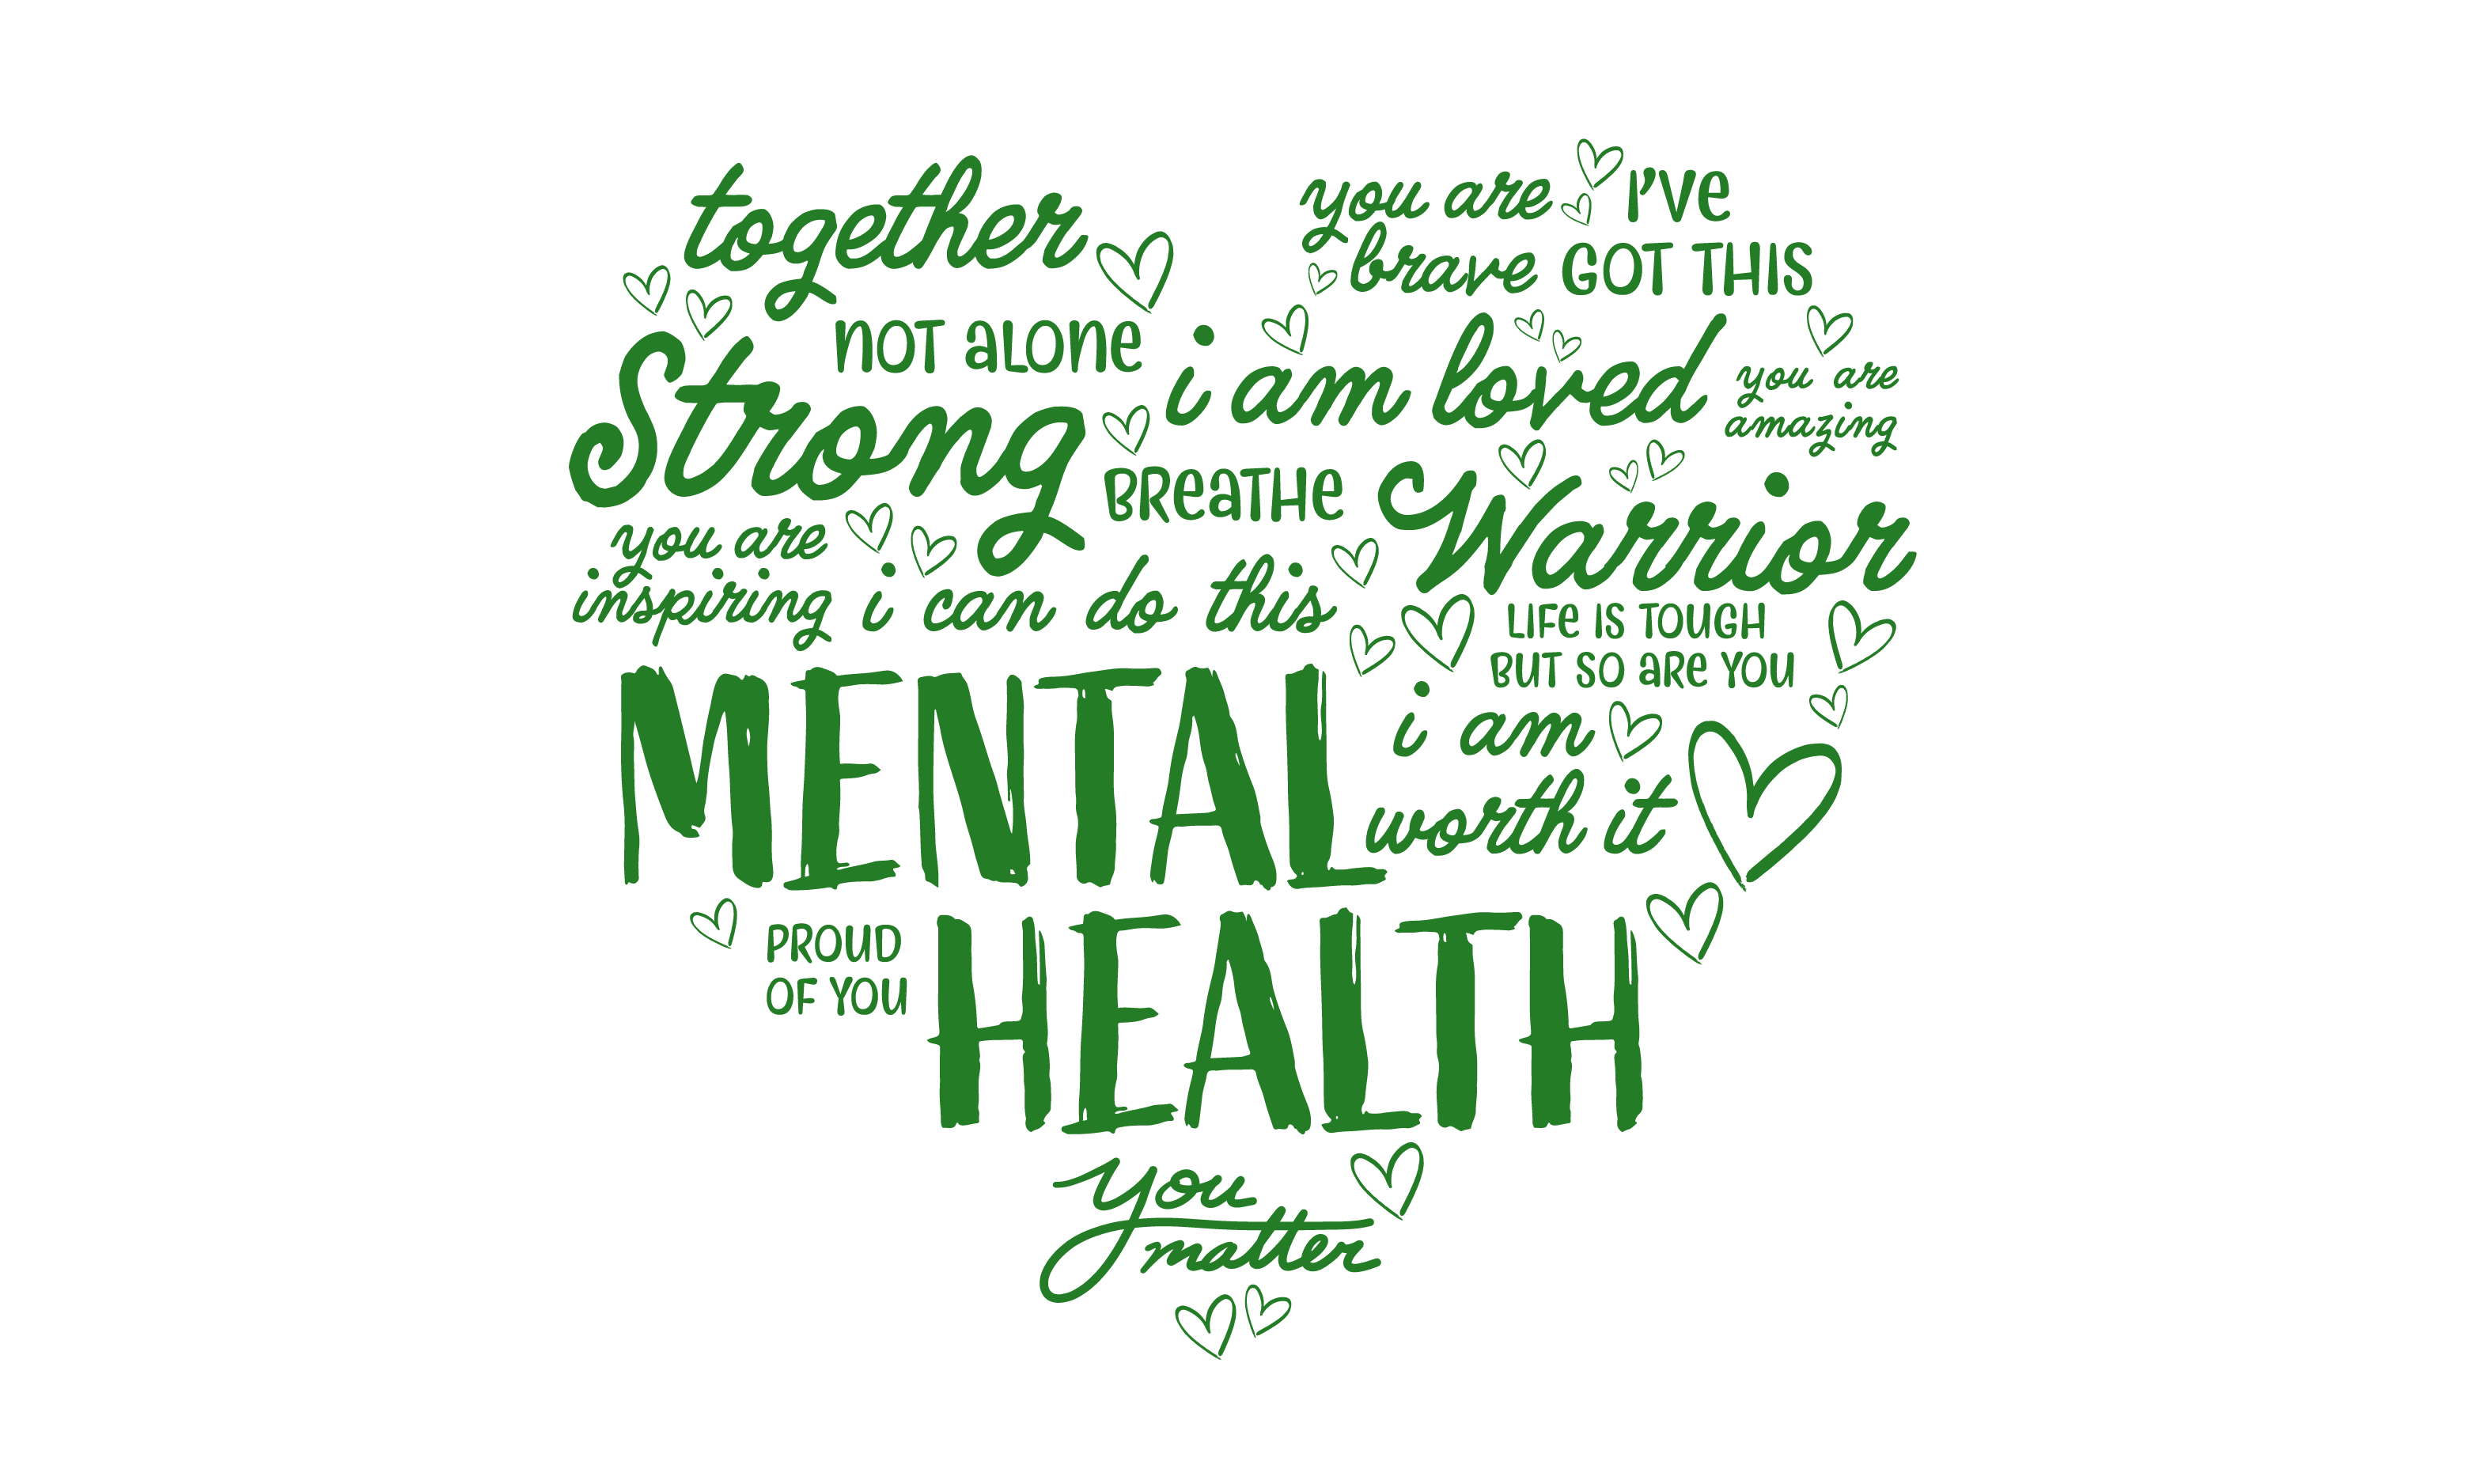 Mental Health Matters - UnityPoint Health